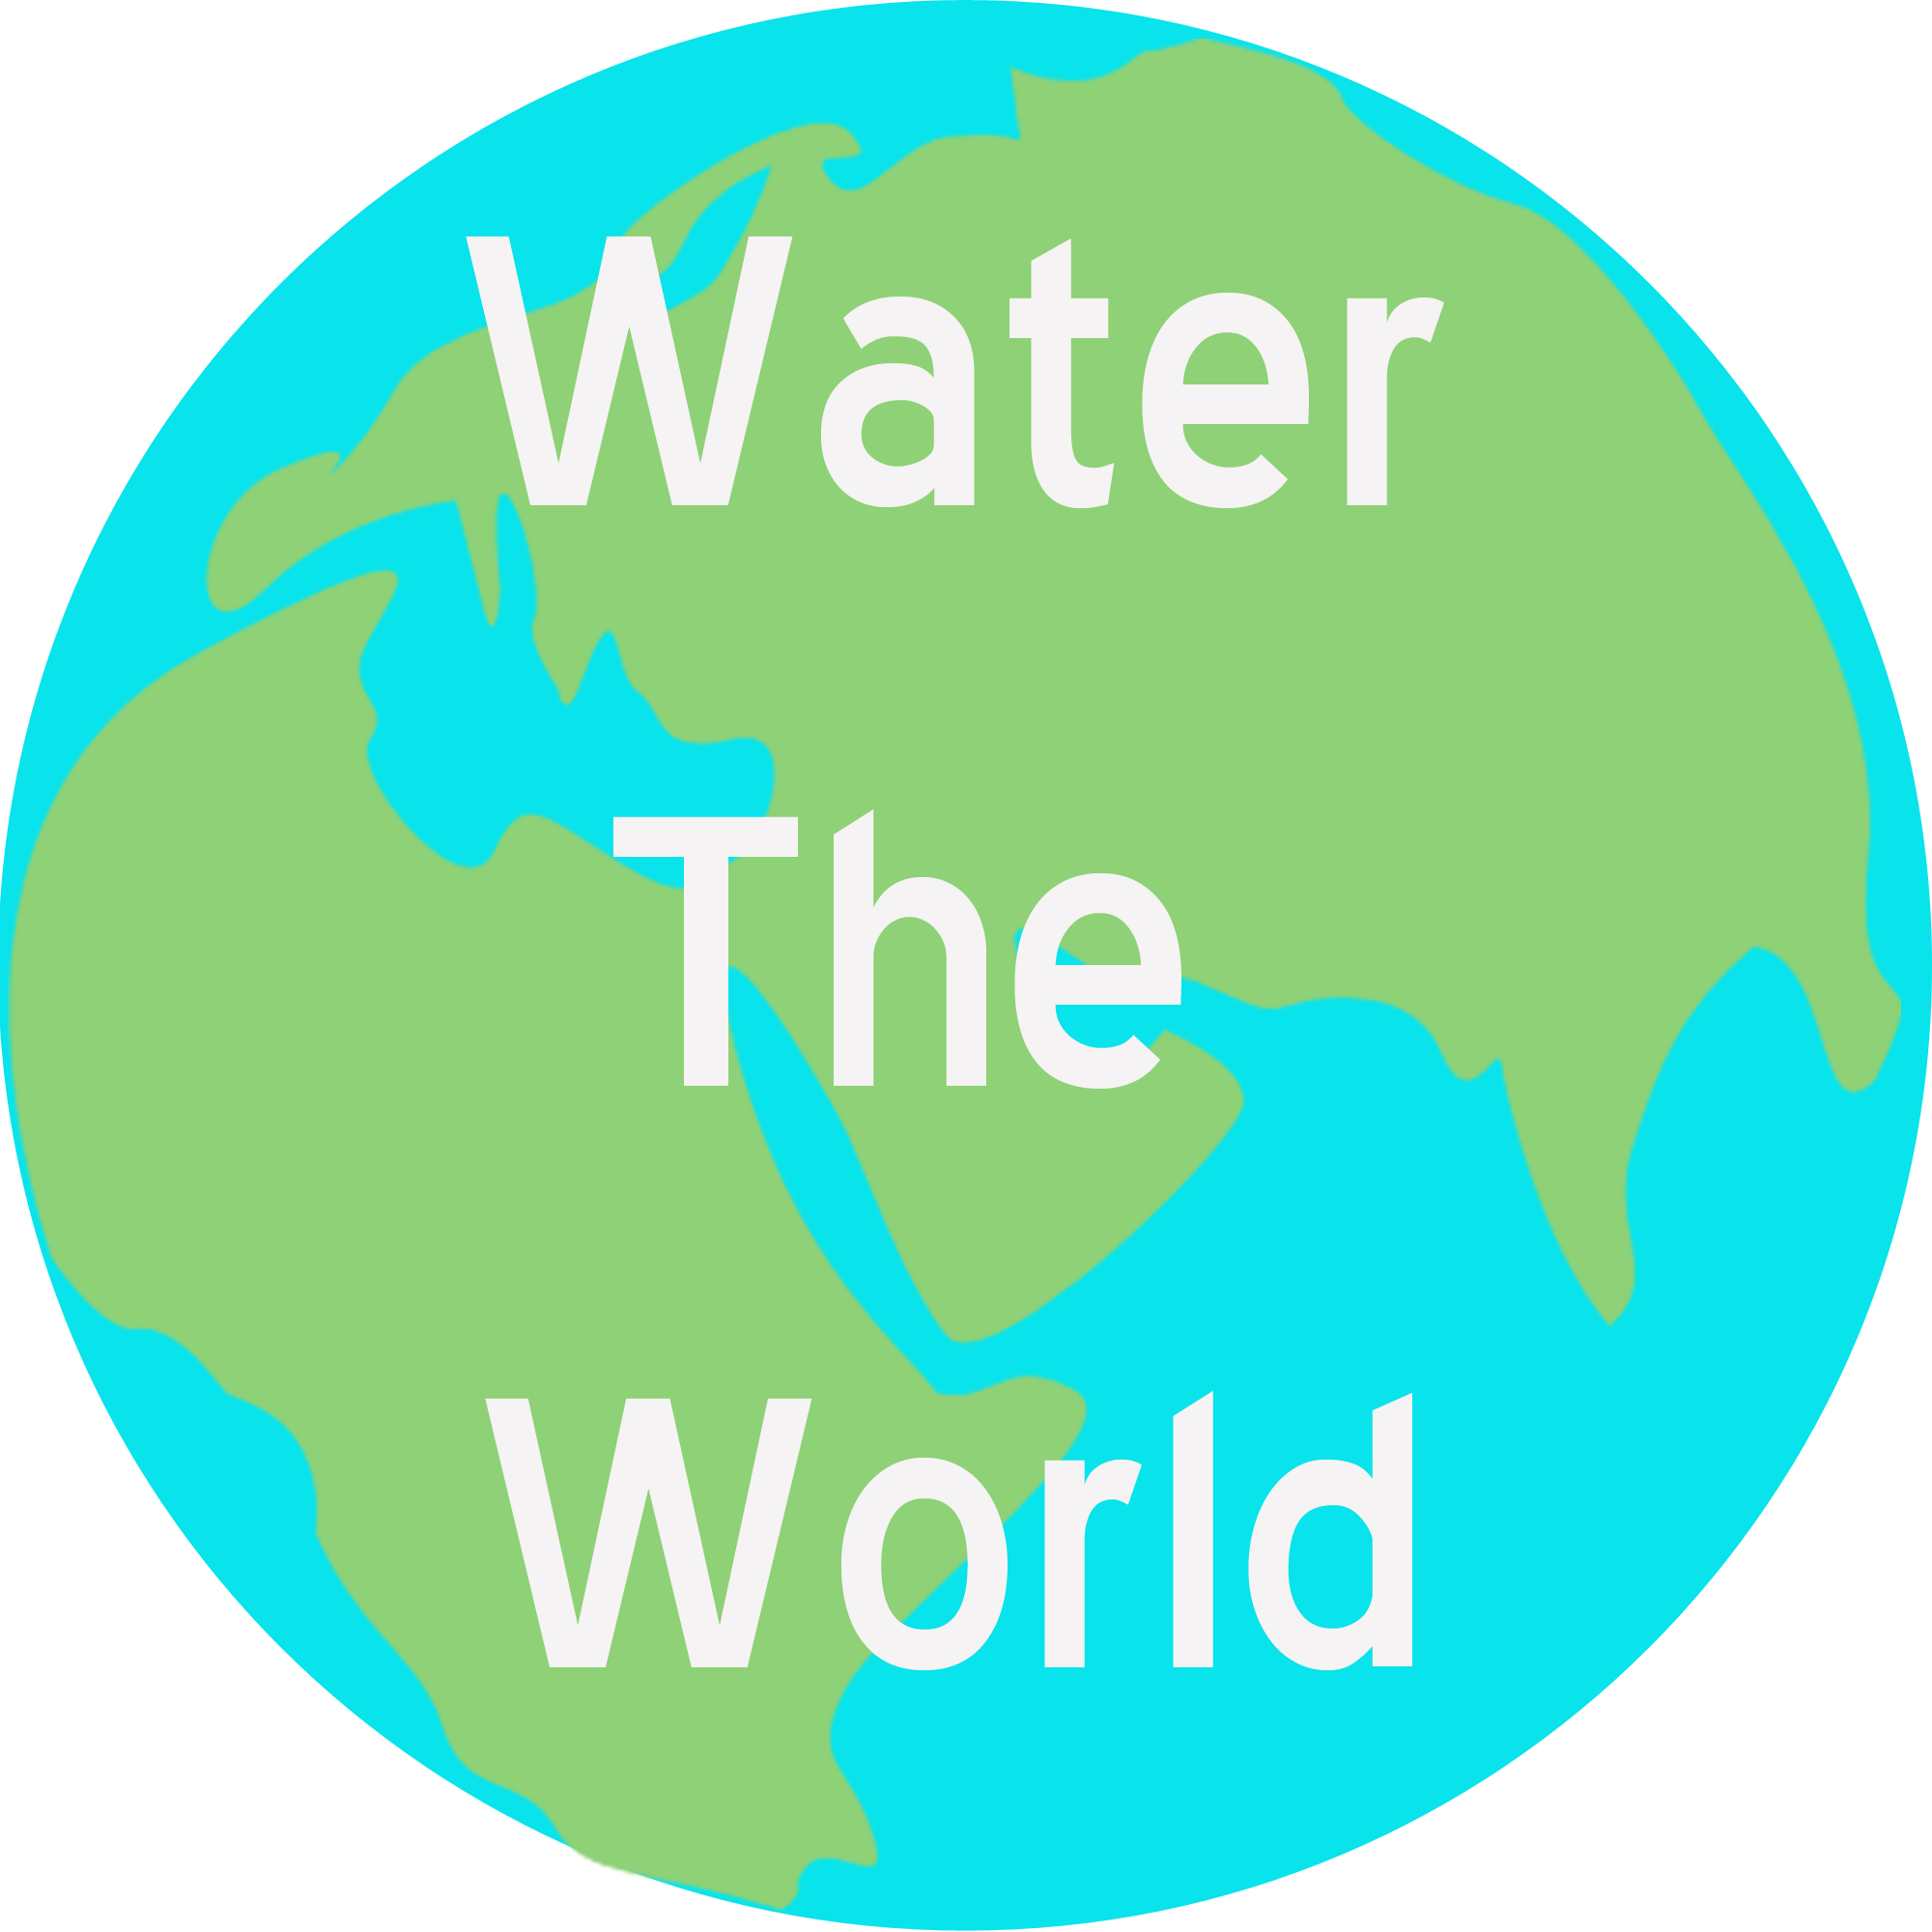 Water the World